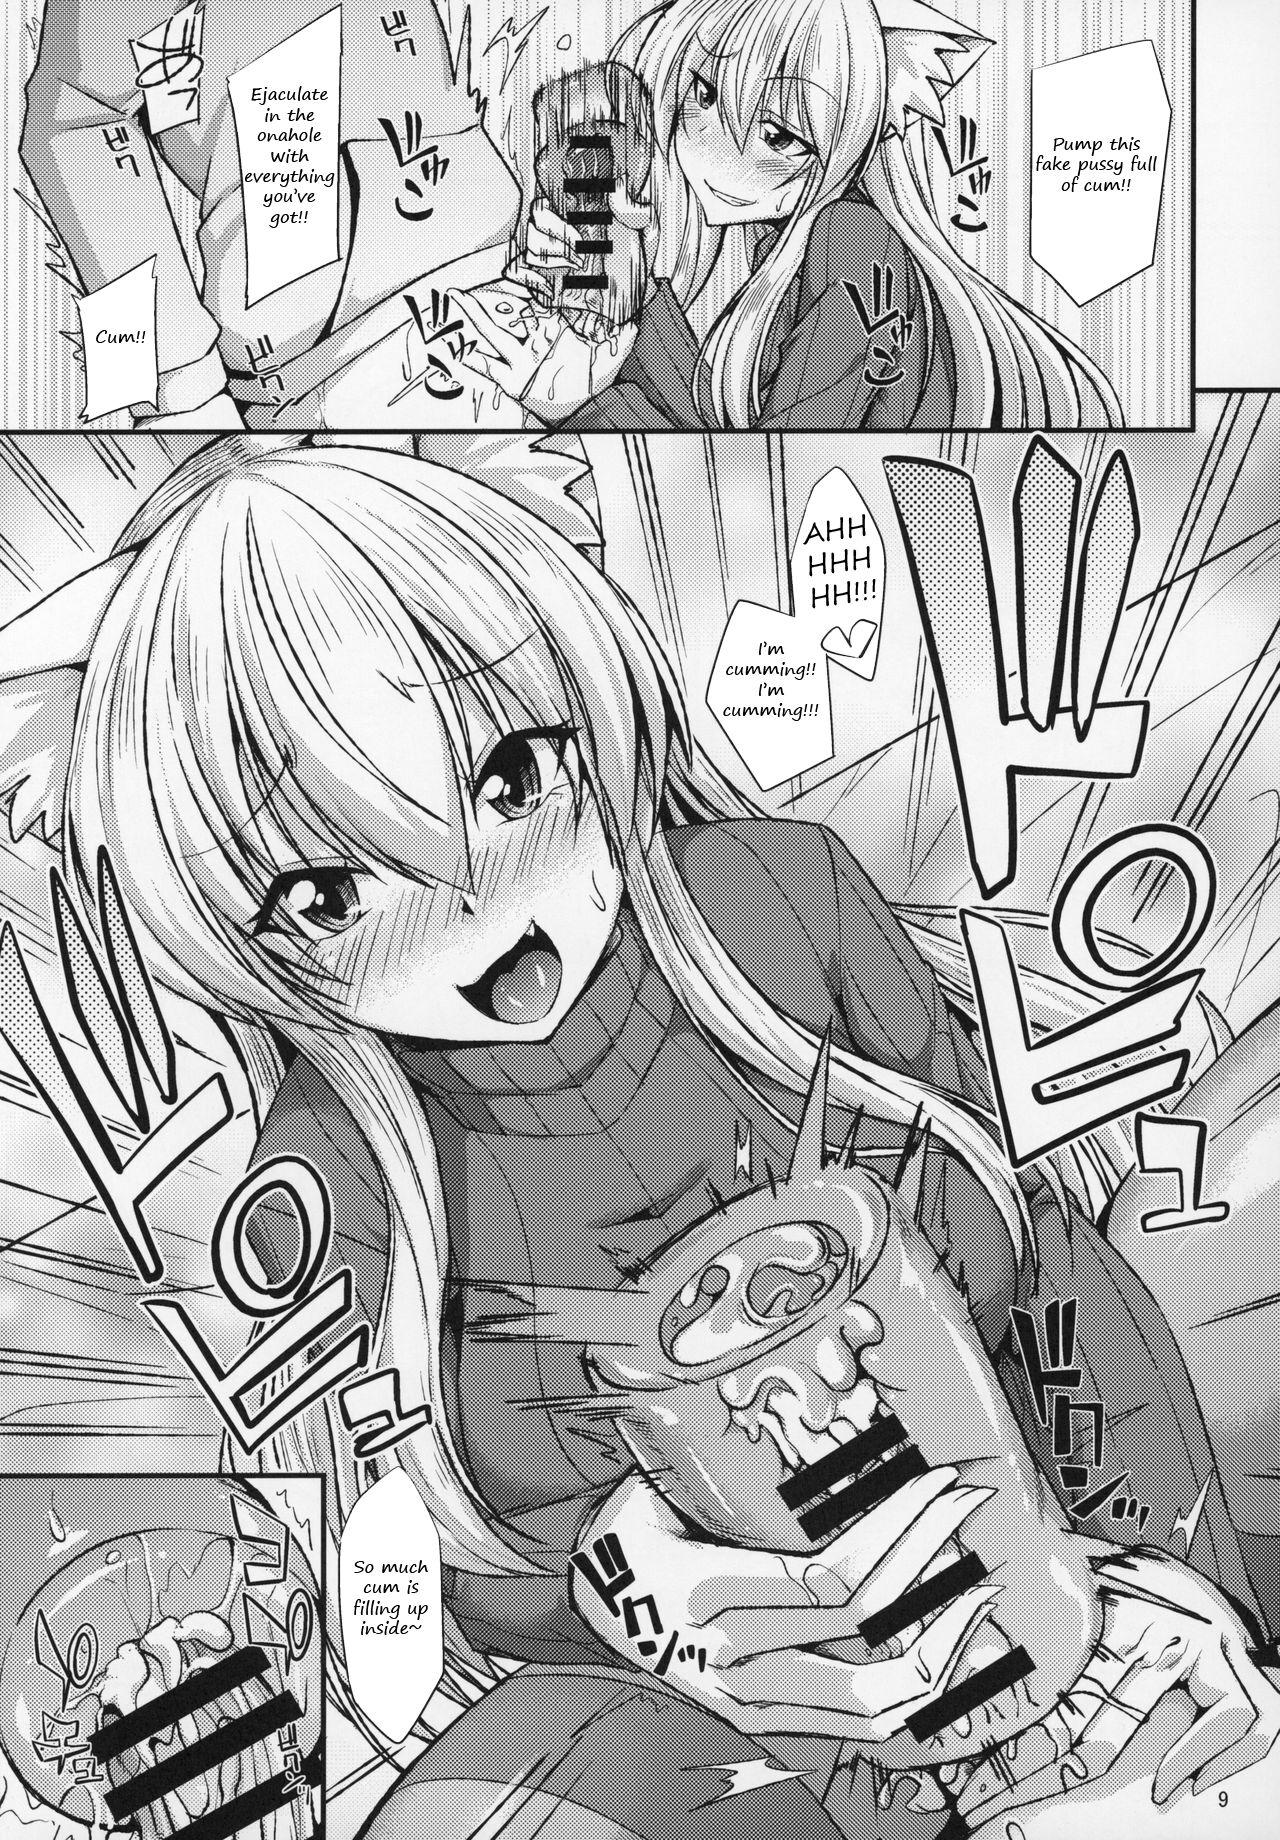 Missionary Position Porn (C97) [ENNUI (Nokoppa)] Nekomimi Onee-san to Onaho de Nyan Nyan | The cat-eared Onee-san and the Onahole [English] - Original Gay Money - Page 10